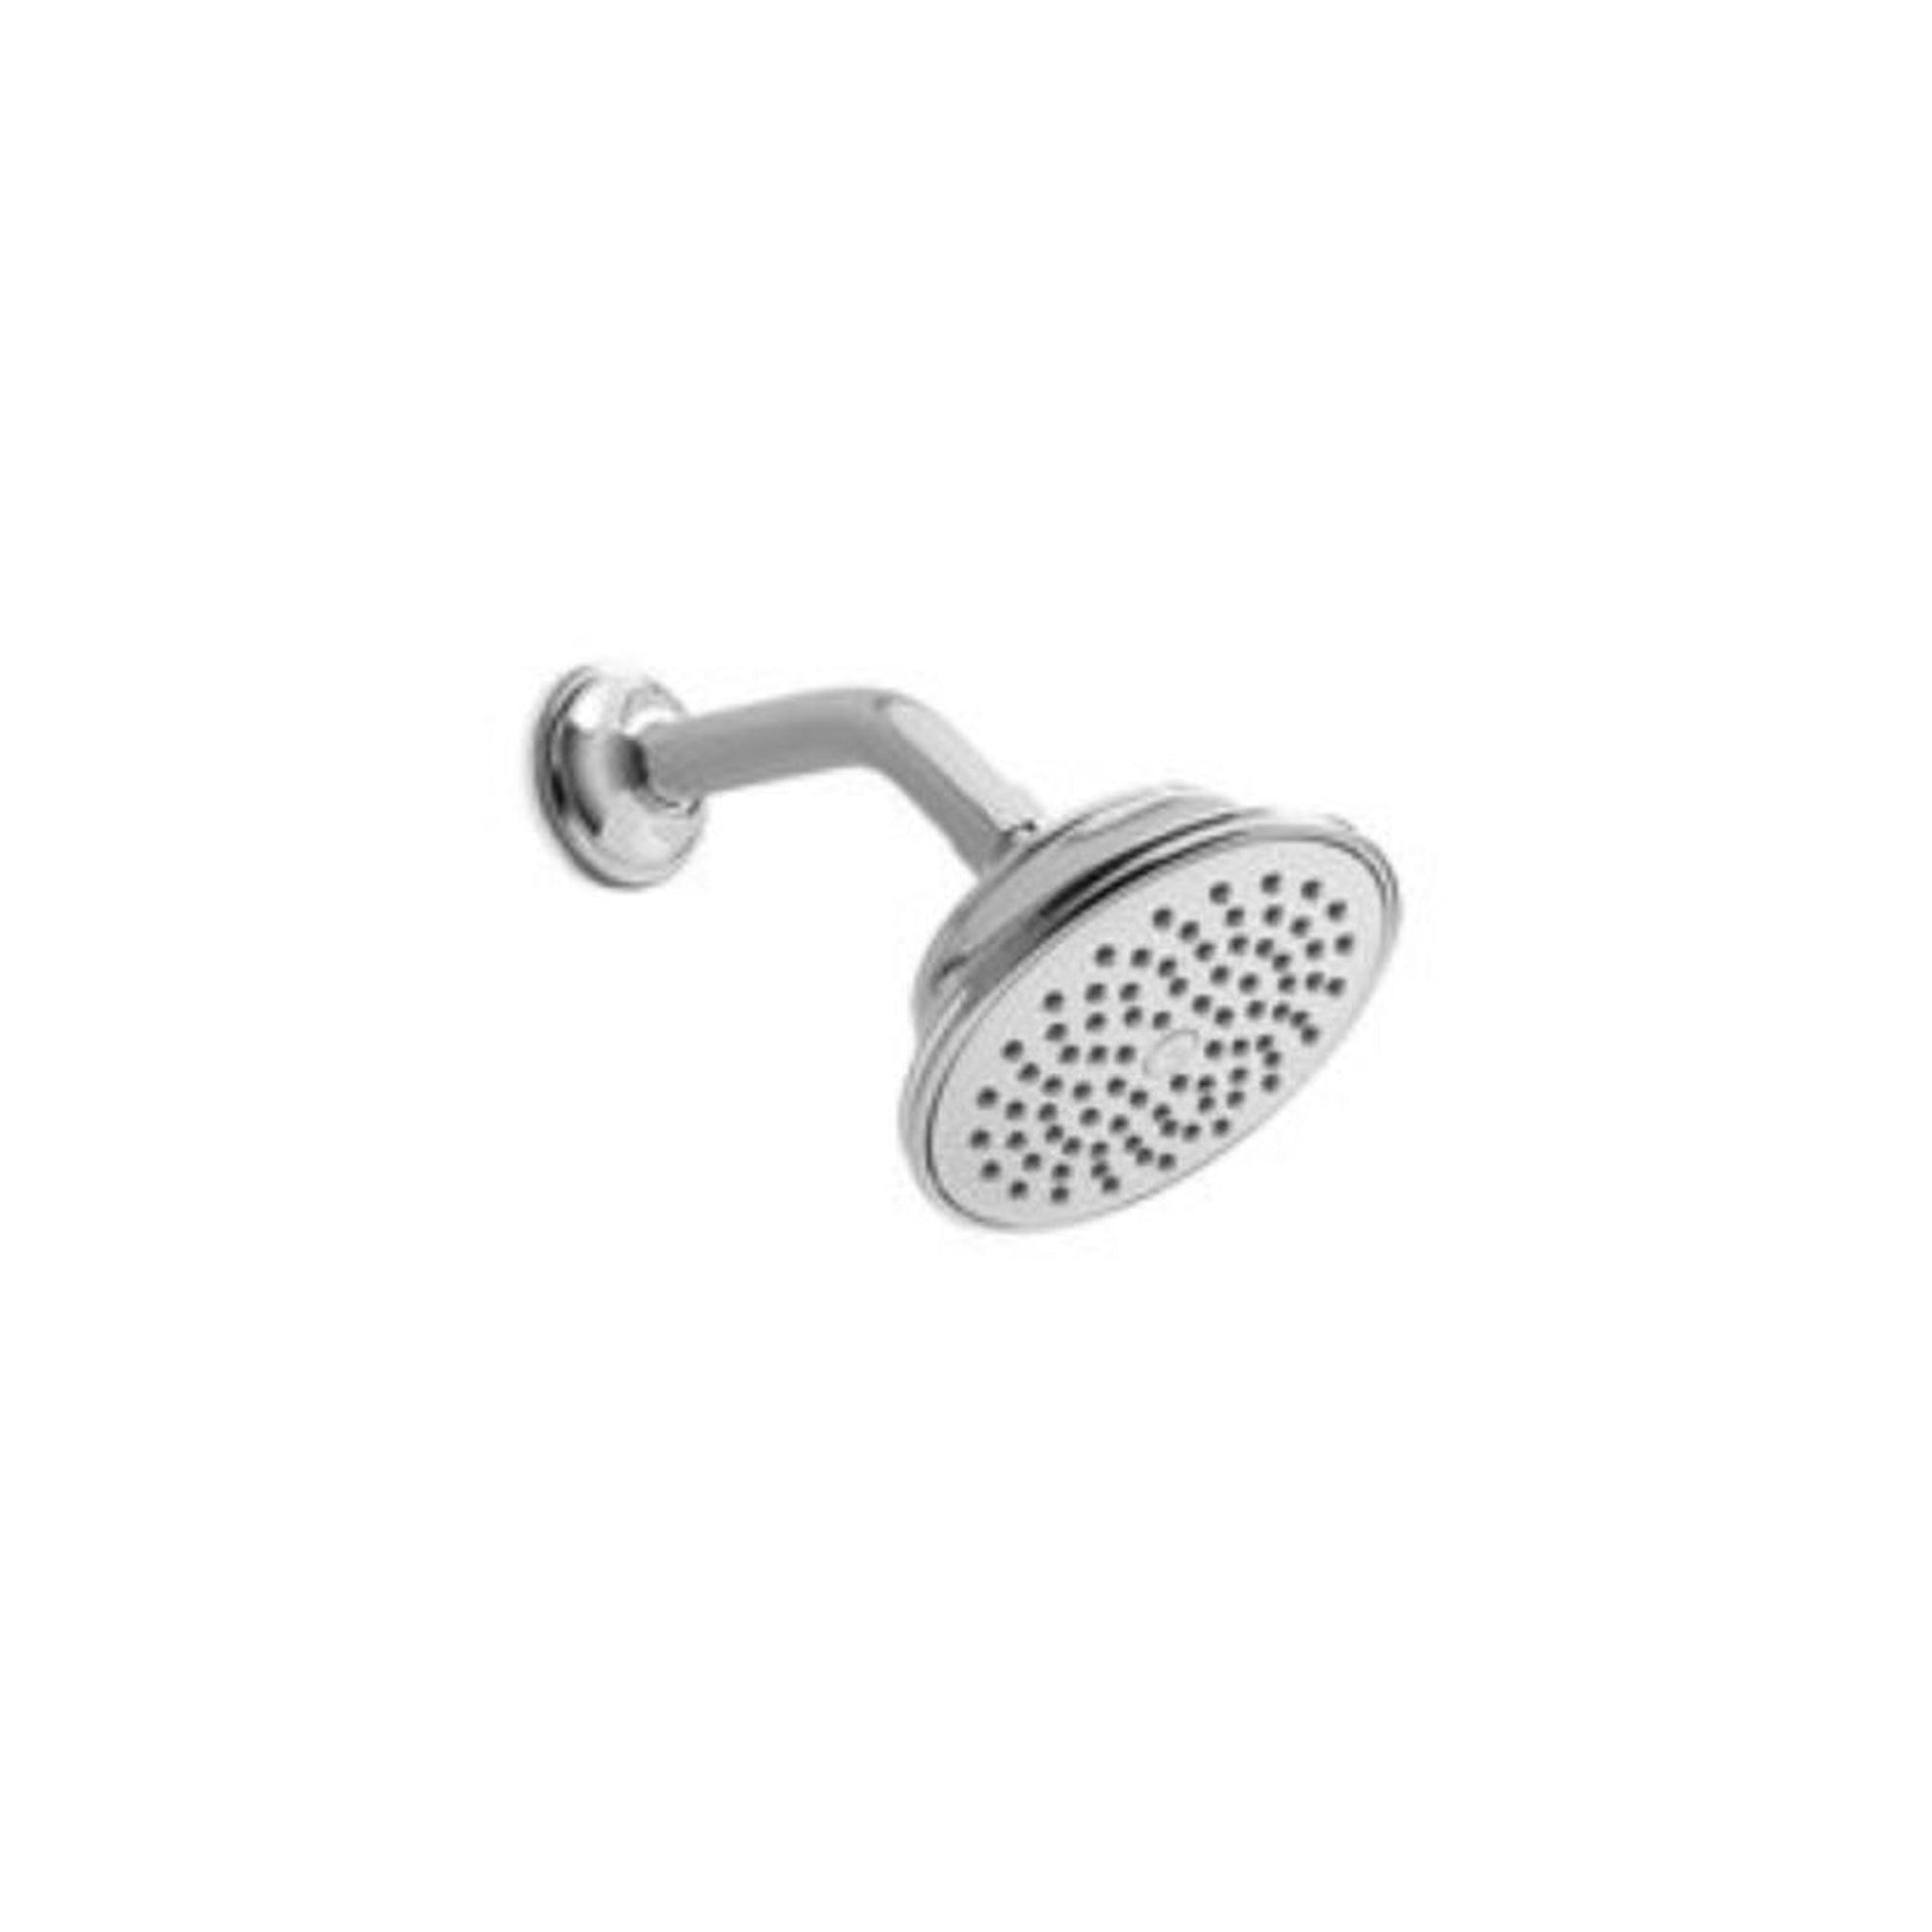 Toto Showerhead 5.5” 1 Mode 2.5GPM Brushed Nickel